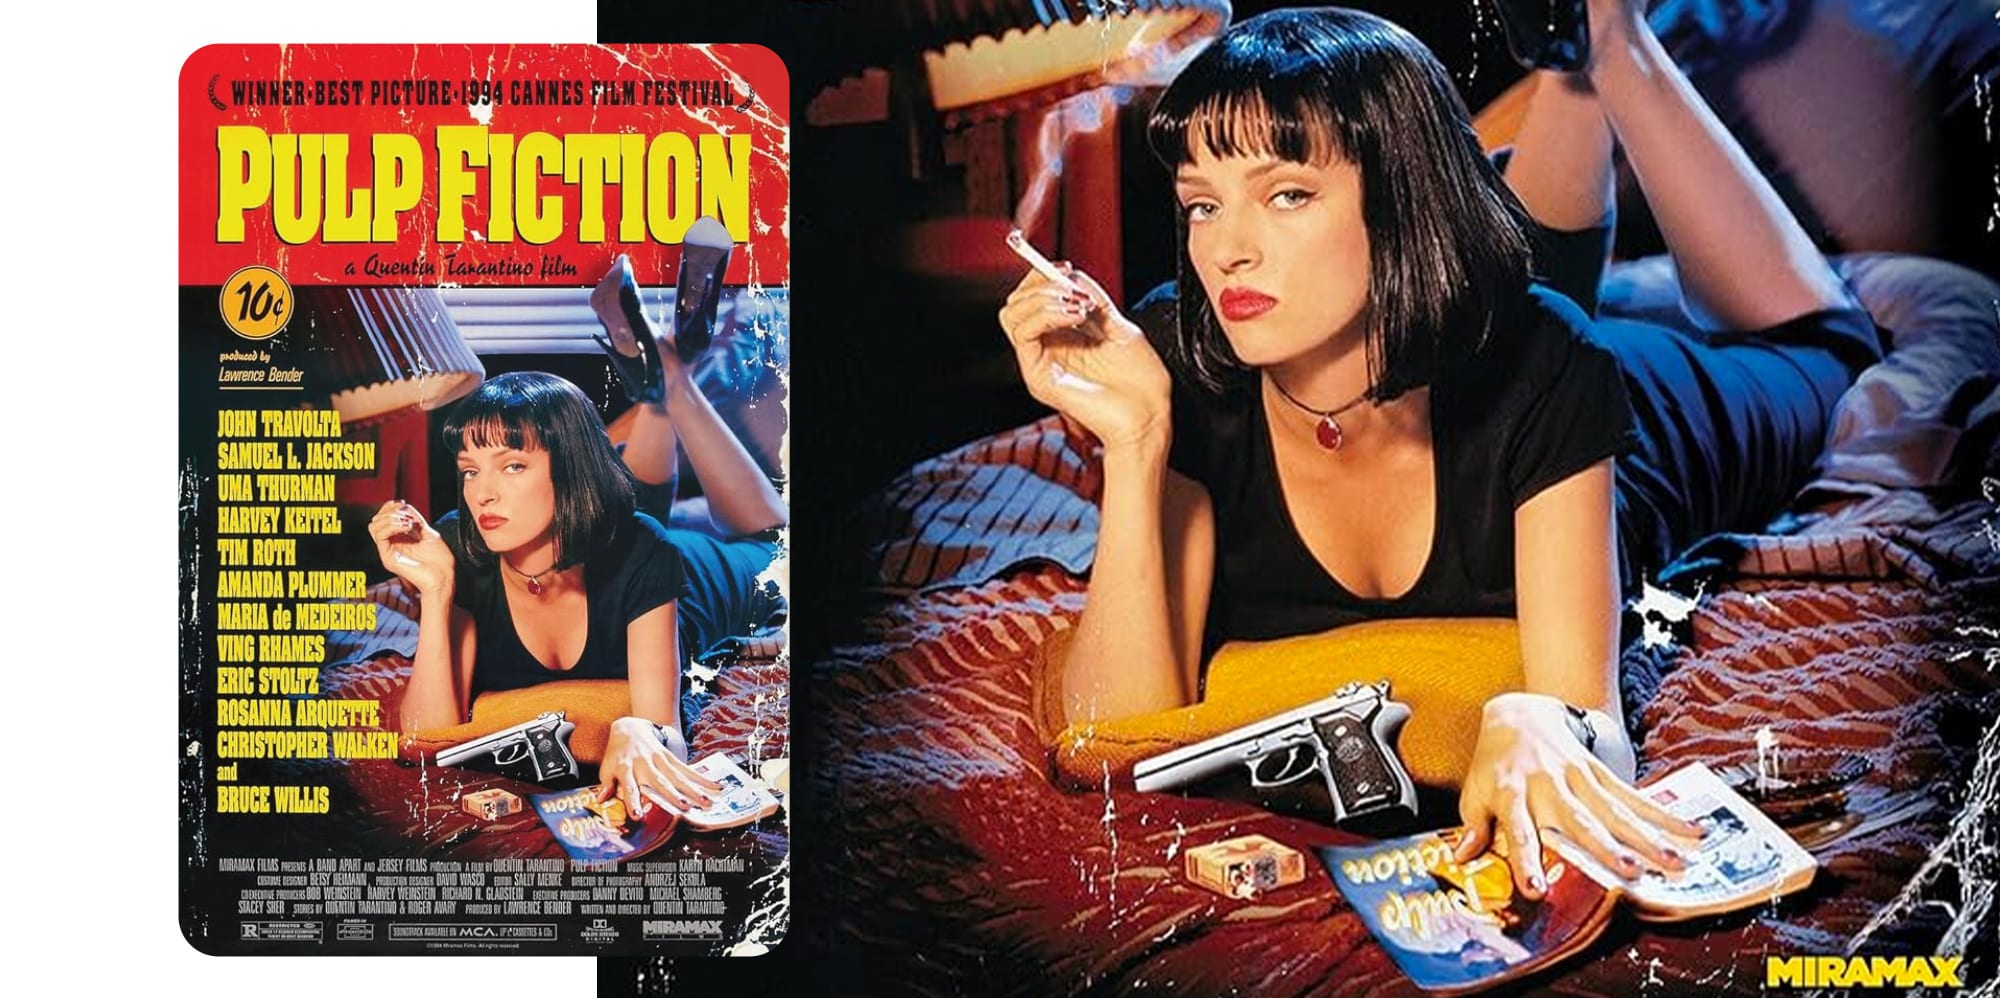 𝙋𝙪𝙡𝙥 𝙁𝙞𝙘𝙩𝙞𝙤𝙣 (1994), Film aesthetic, Aesthetic movies, Pulp  fiction